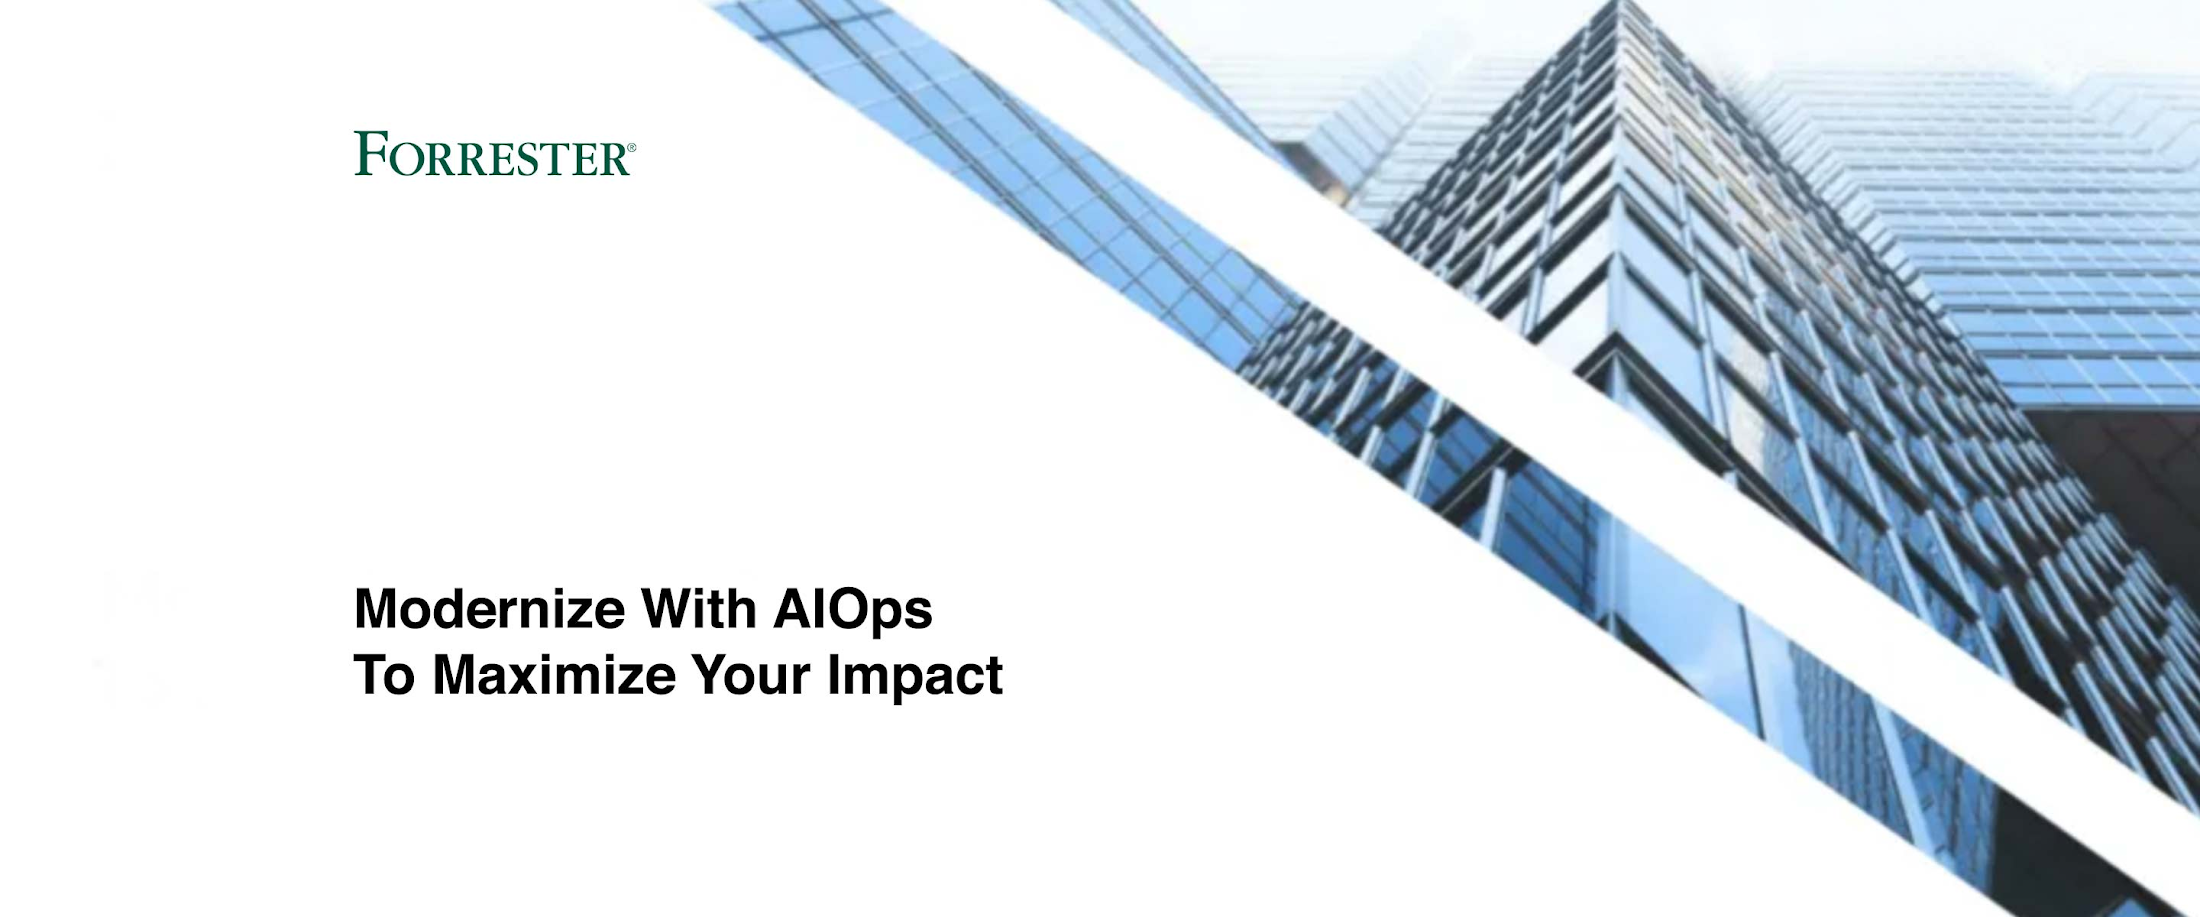 Free Download: Modernize With AIOps To Maximize Your Impact | Google ...